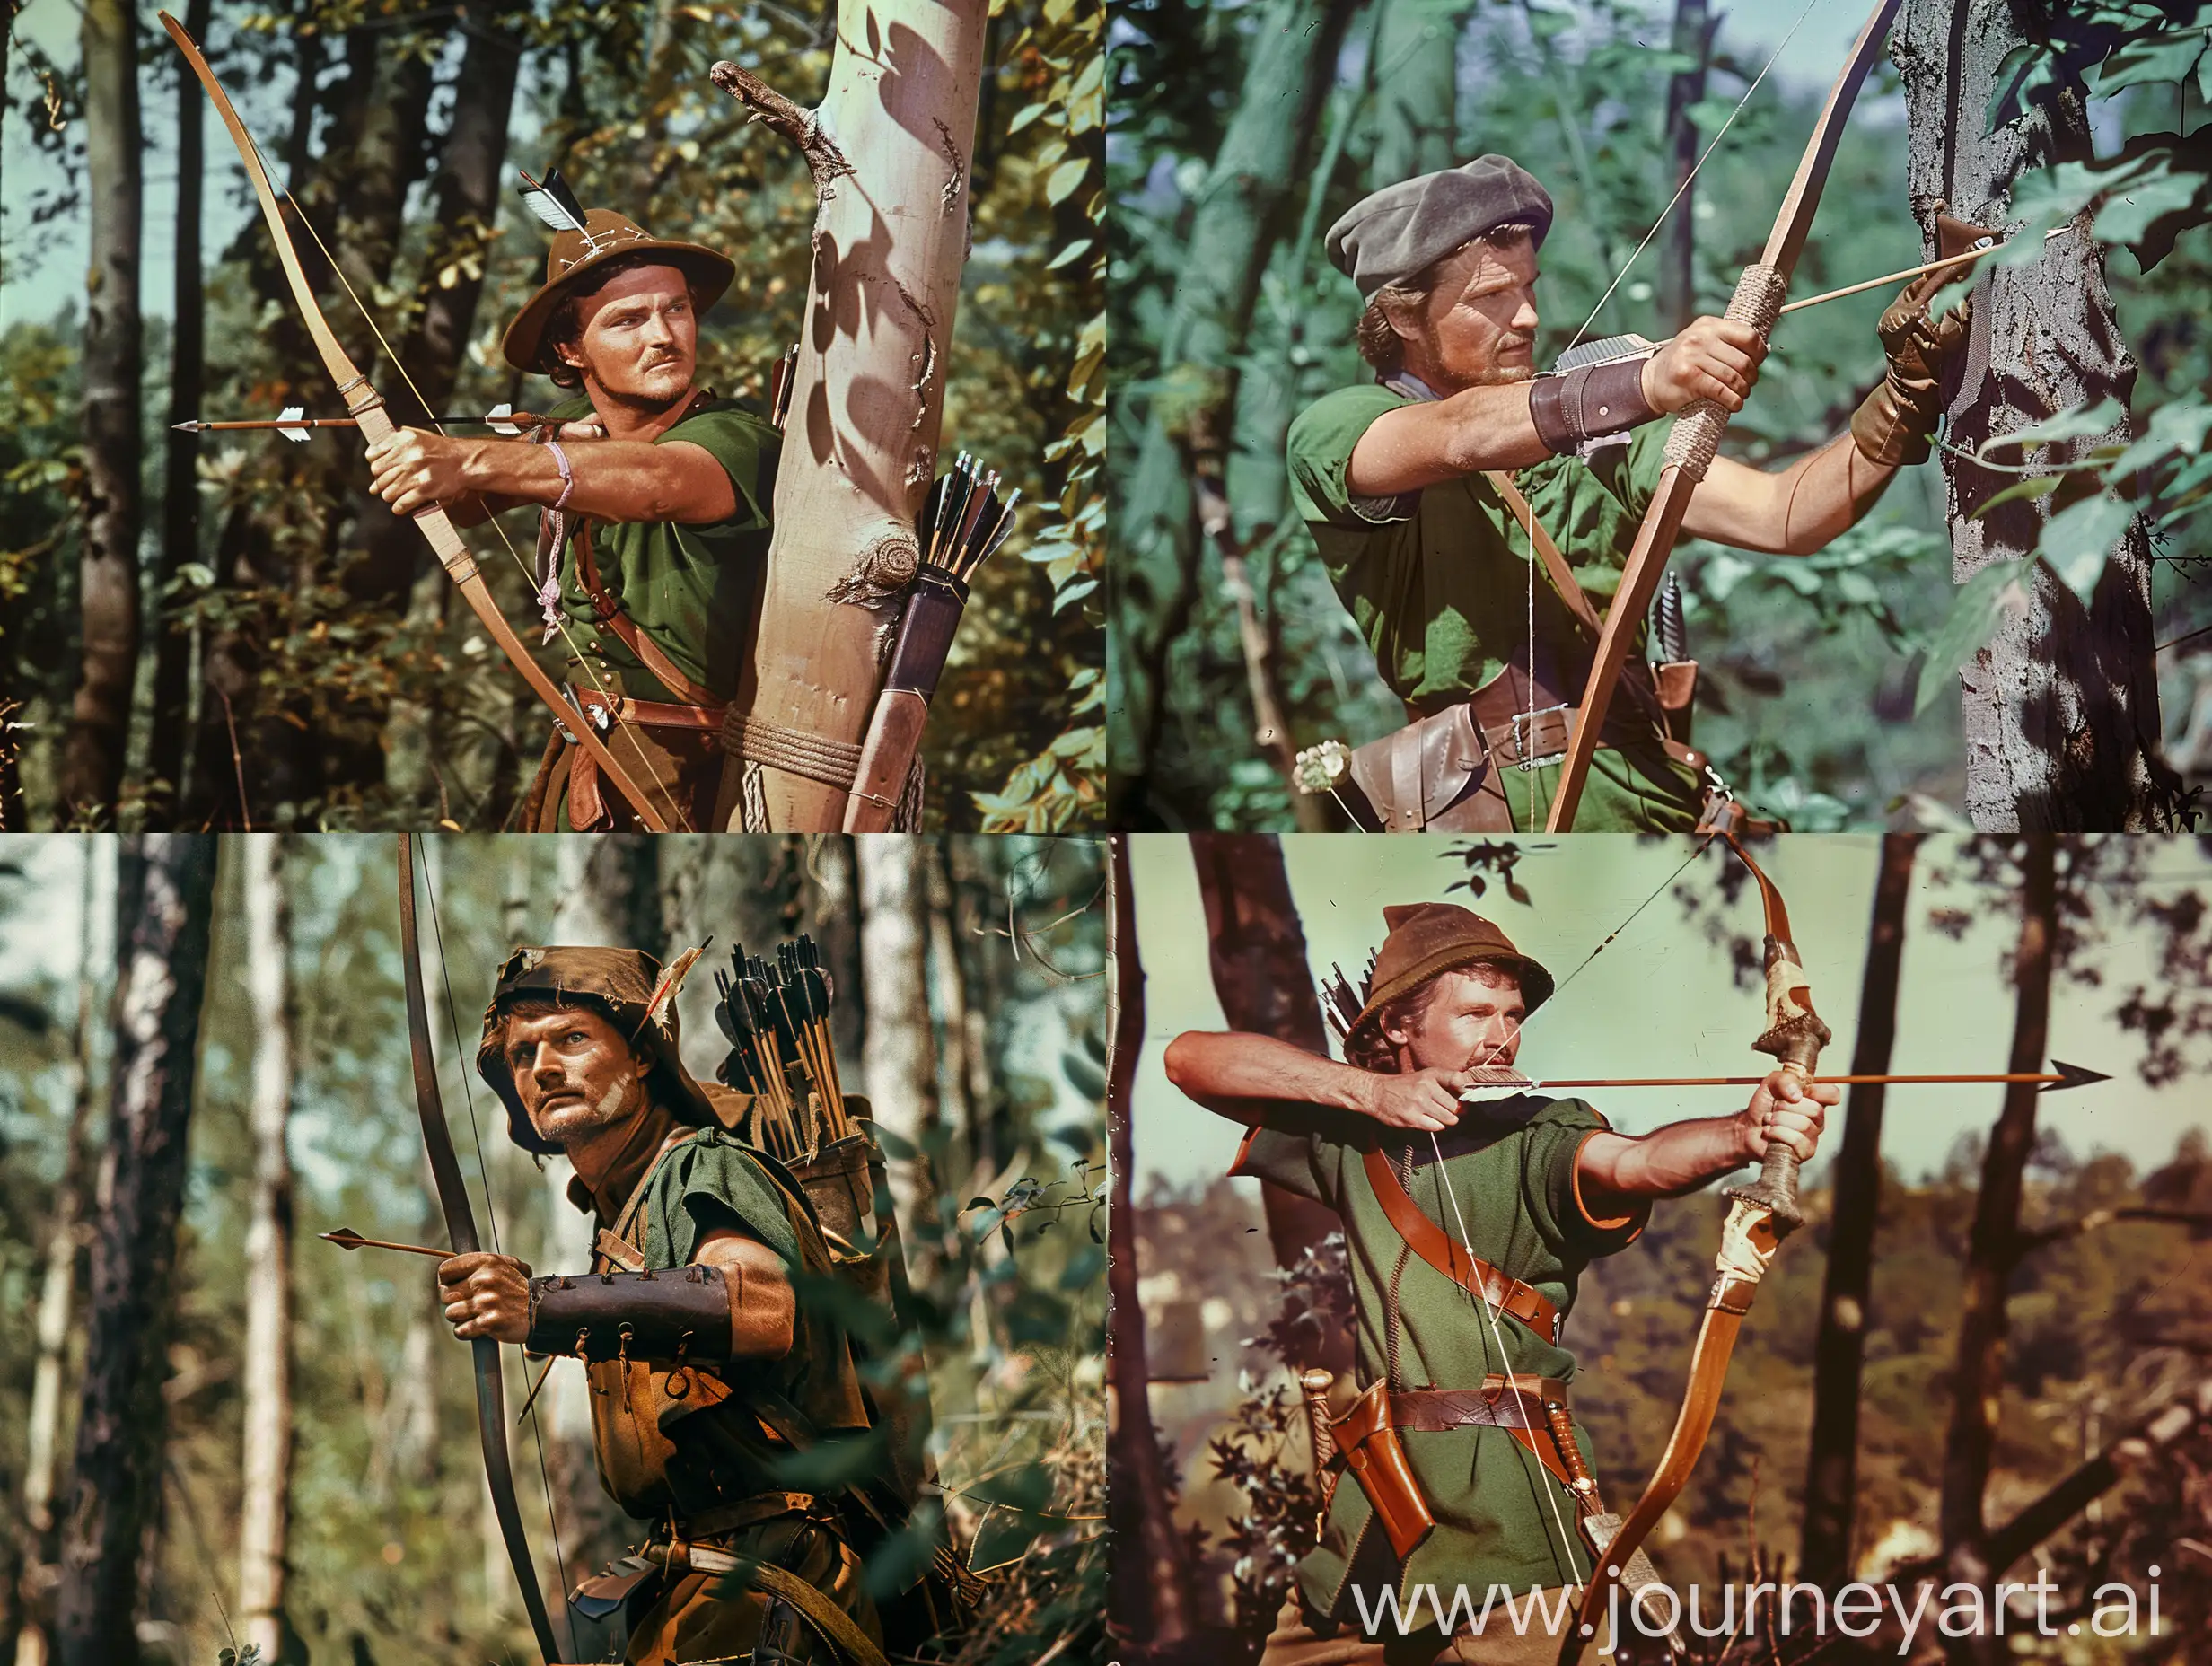 Vintage-Hunter-Man-Searching-Forest-with-Knife-and-Bow-and-Arrow